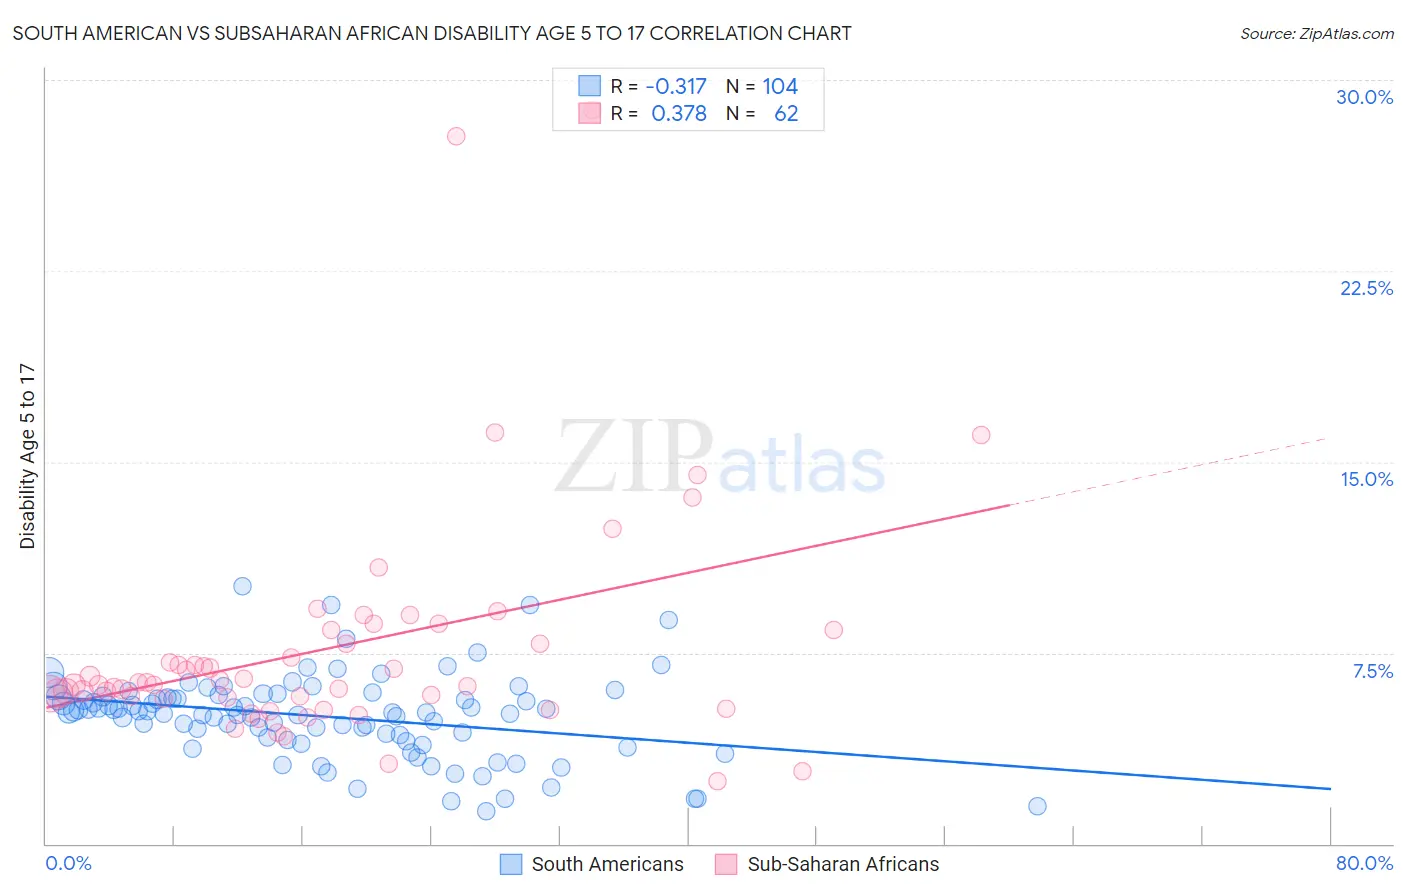 South American vs Subsaharan African Disability Age 5 to 17